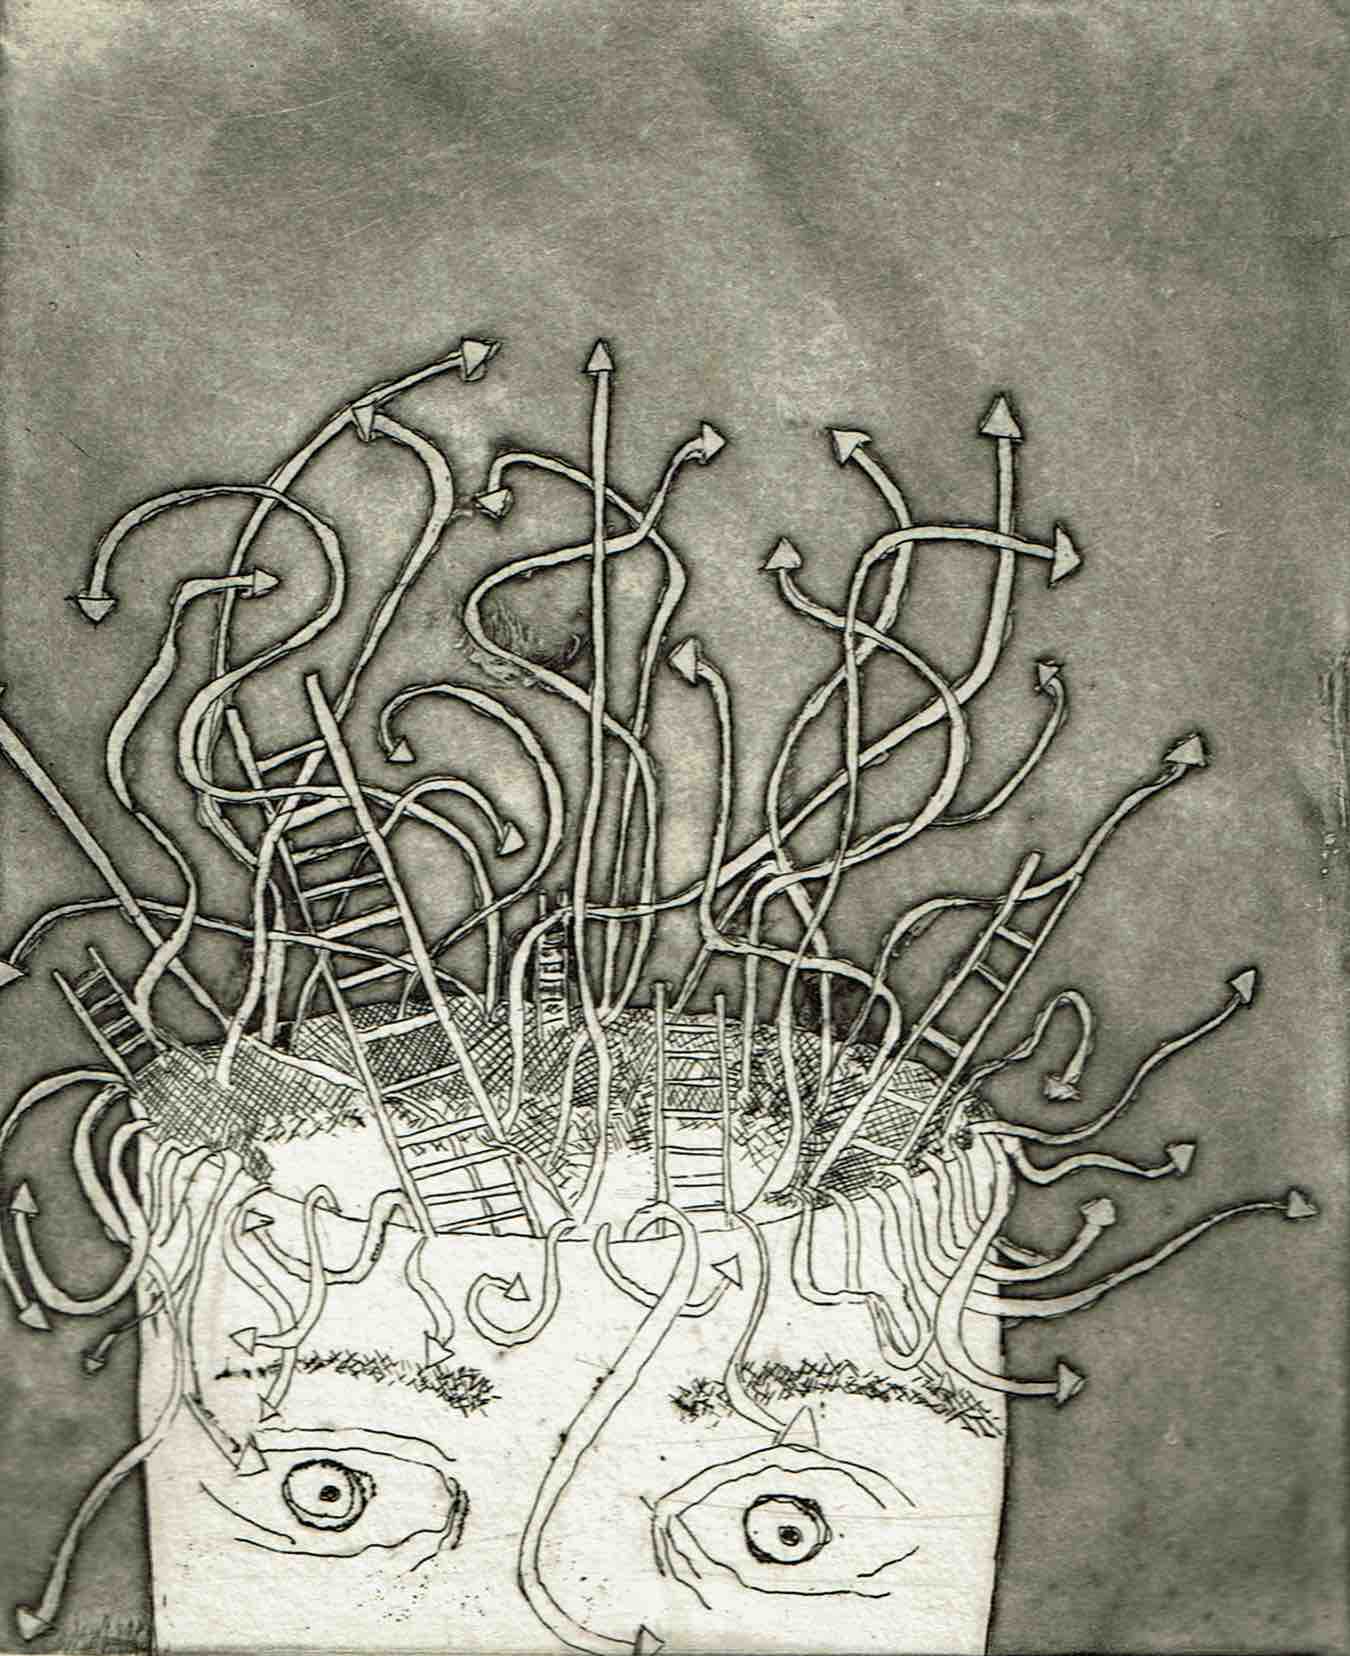 This is a print of a line drawing, black on cream. From the lopped-off top of someone's head, a tangle of arrows and ladders emerges erratically. The eyes of the person are wide and wild, staring blankly out of the picture but not making eye contact with us.